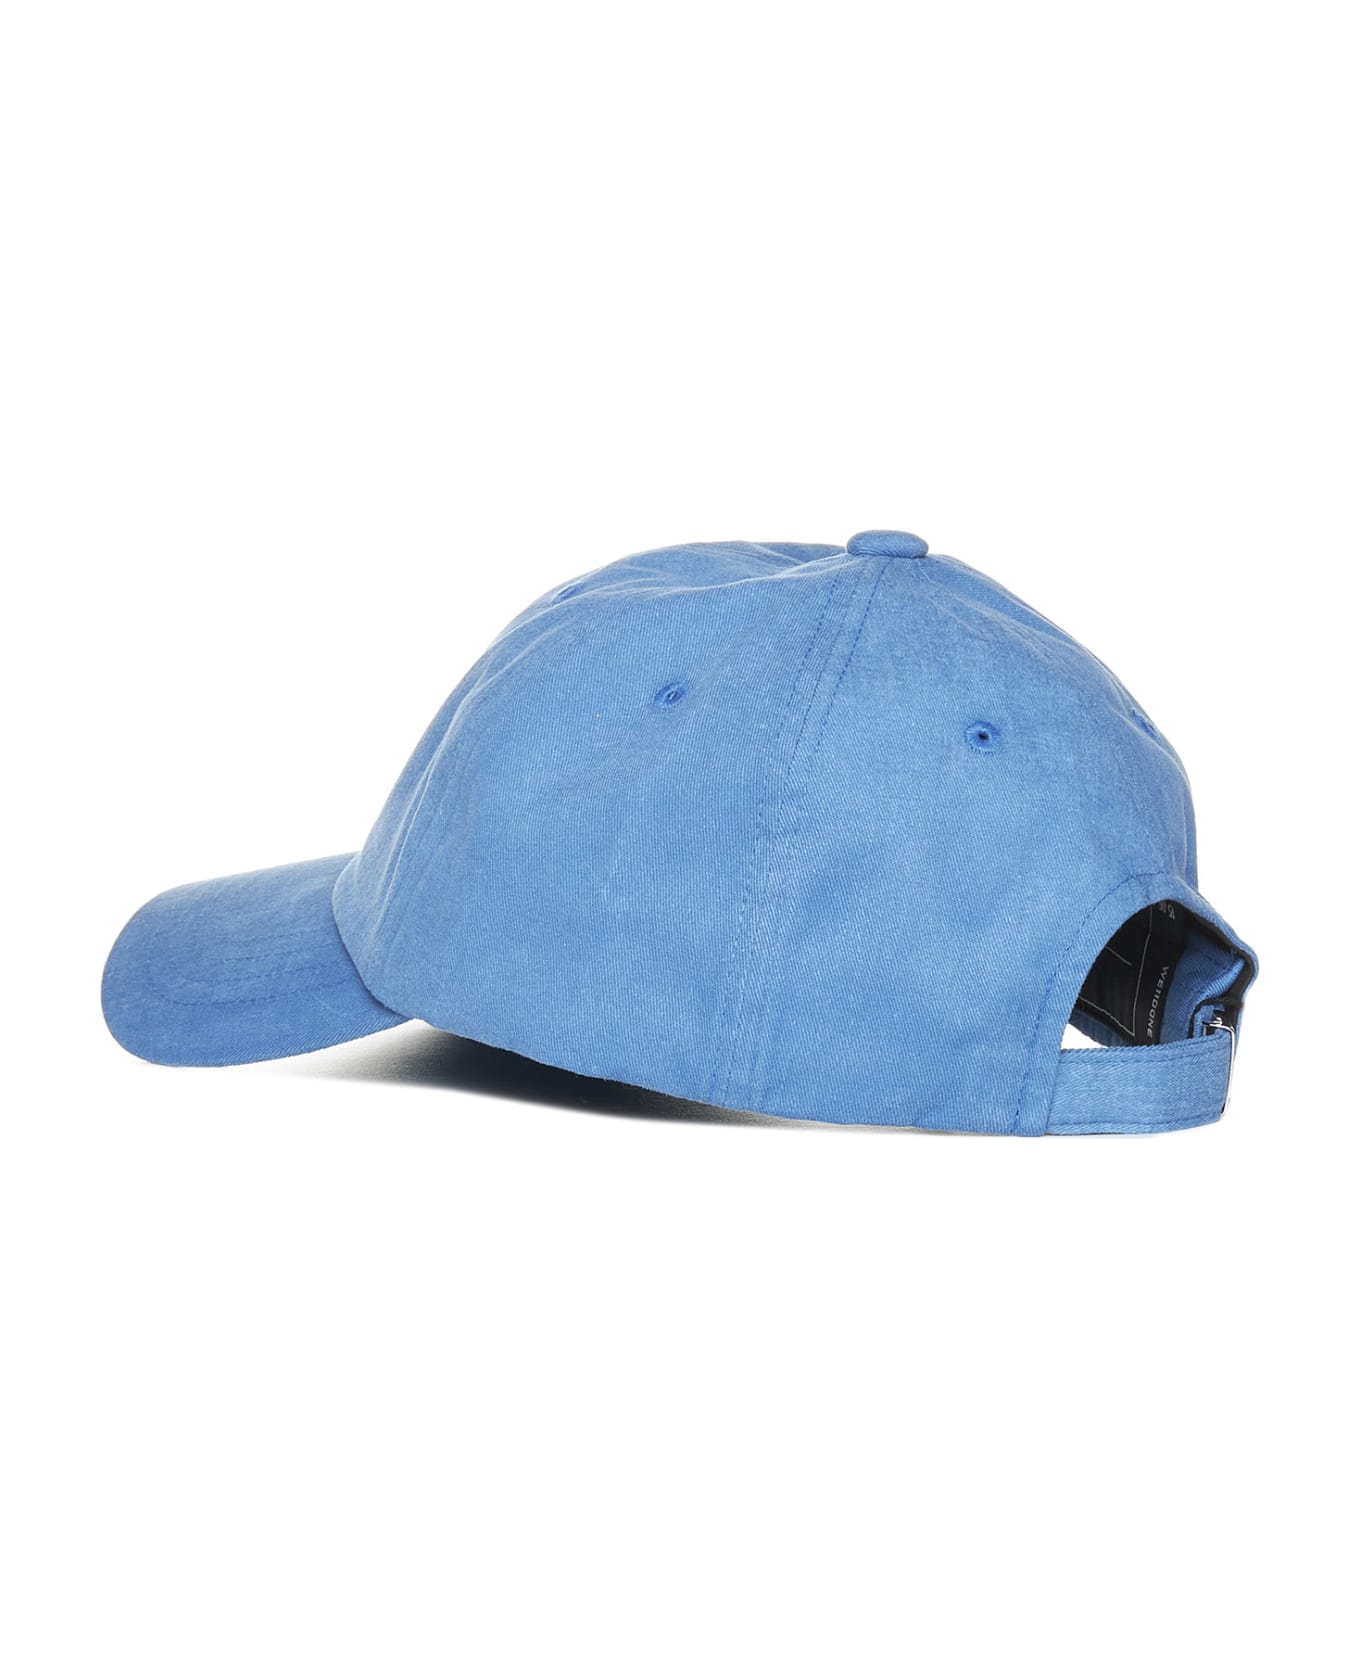 WE11 DONE Hat - Blue